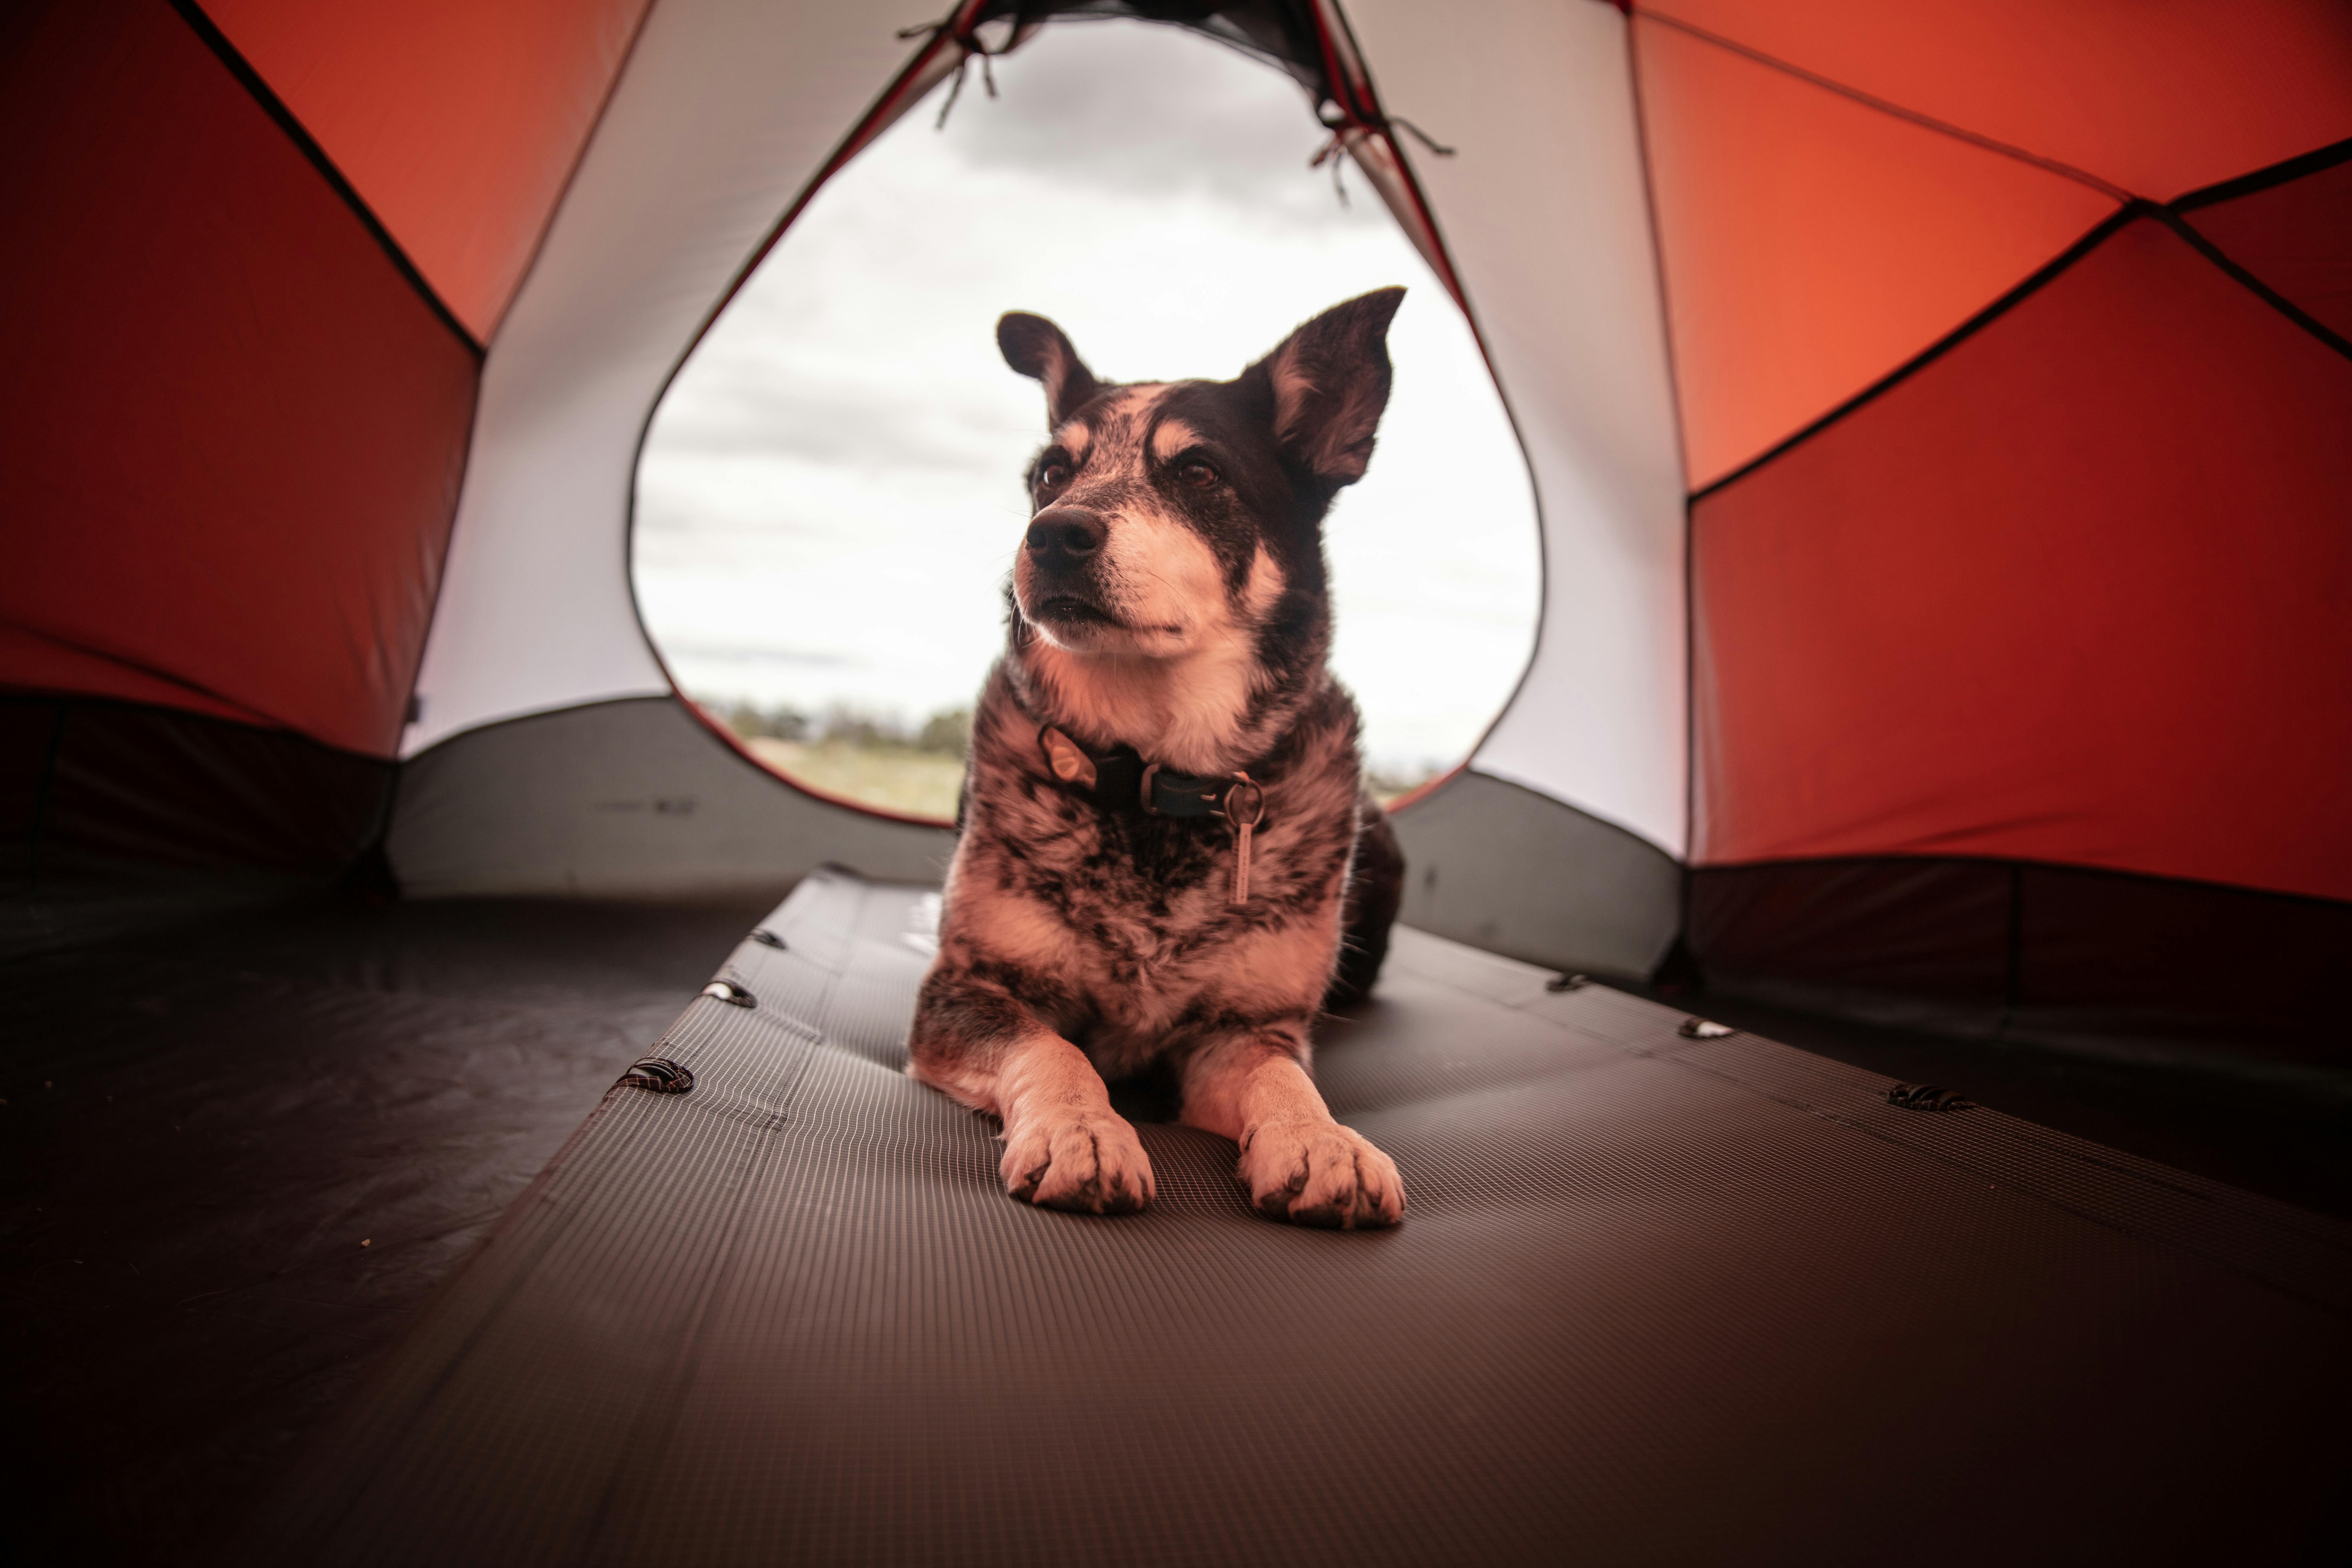 wellness-everything-you-need-to-know-about-traveling-cross-country-with-a-dog-hero-image